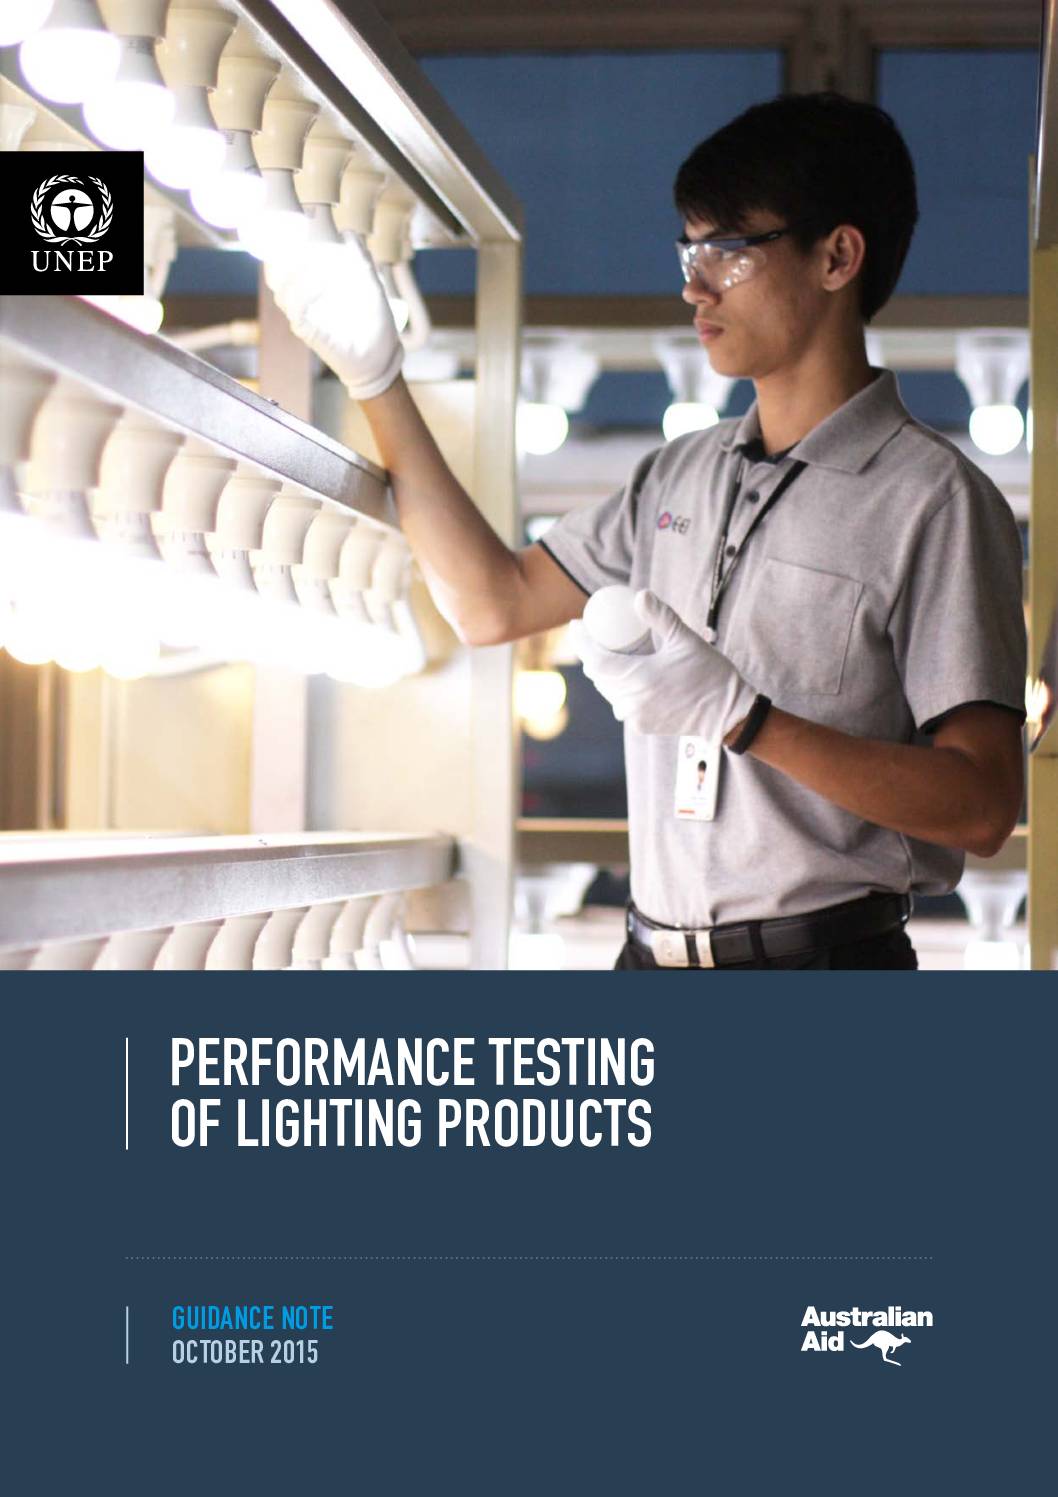 PERFORMANCE TESTING OF LIGHTING PRODUCTS